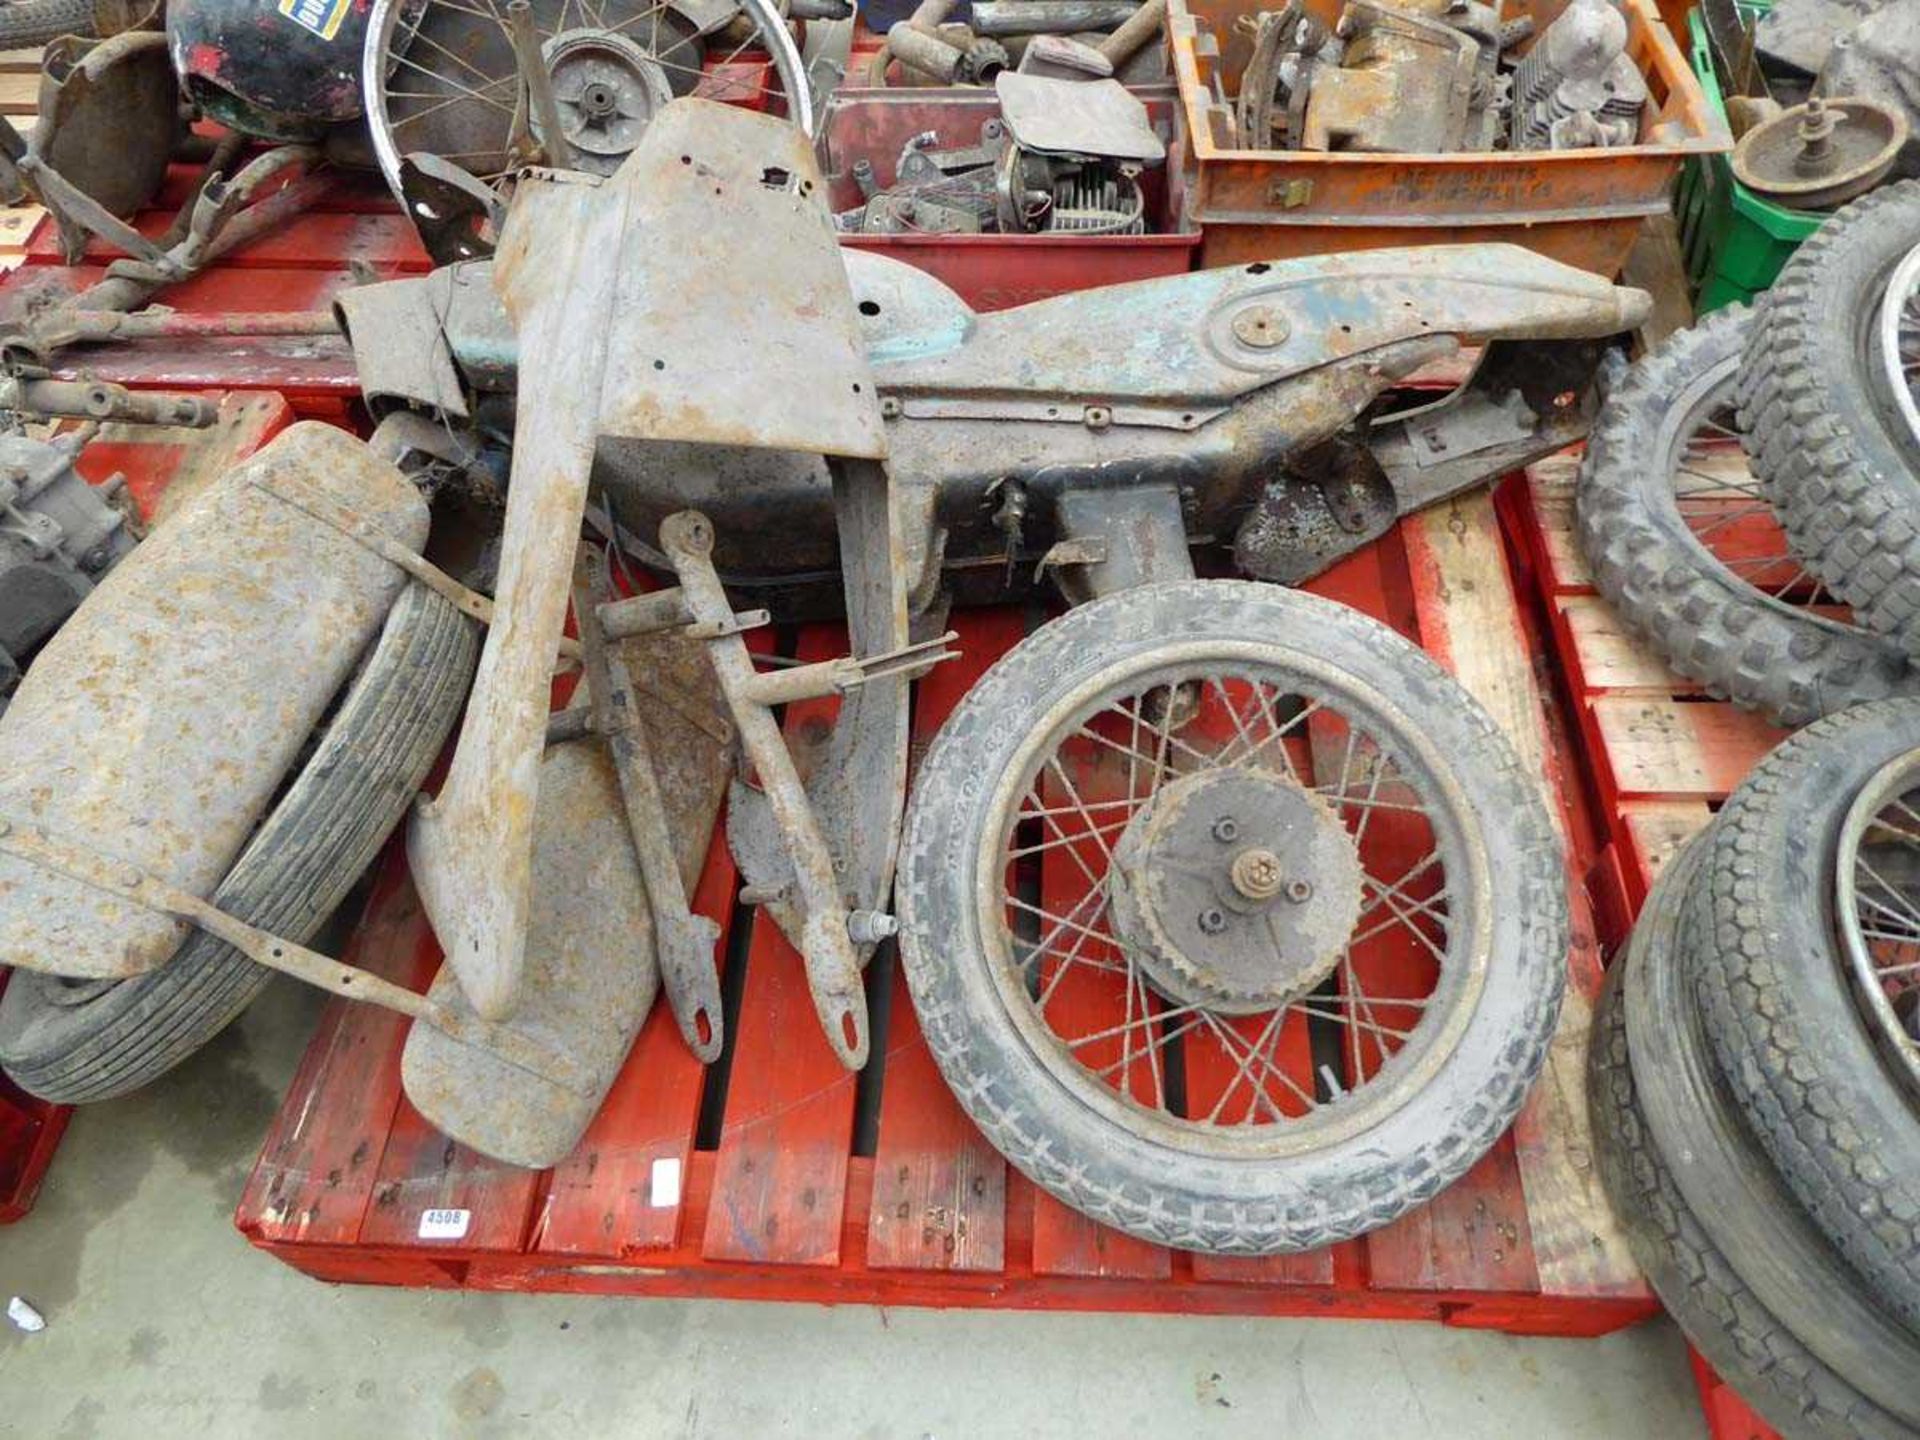 Pallet containing a motorcycle frame with wheels and spare parts